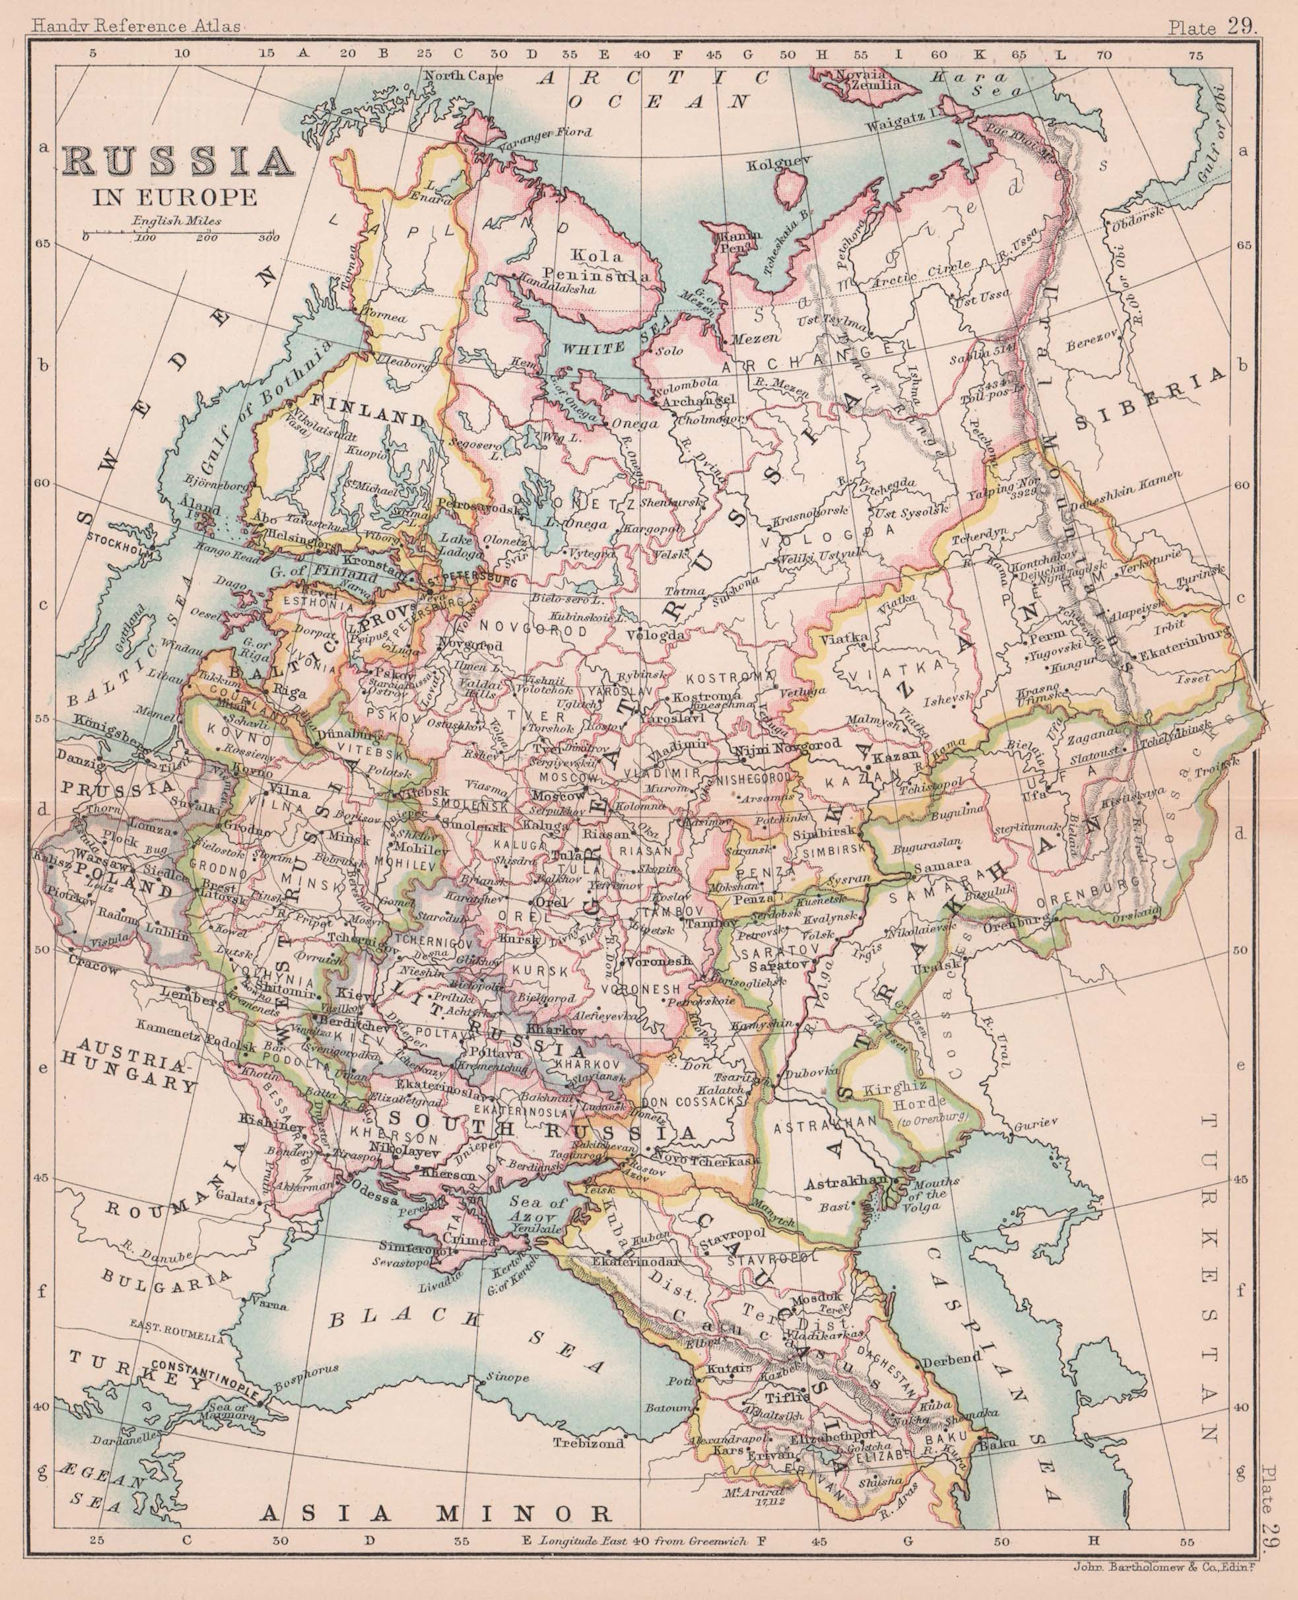 Russia in Europe. Poland. West/Little/Great/South Russia. BARTHOLOMEW 1893 map